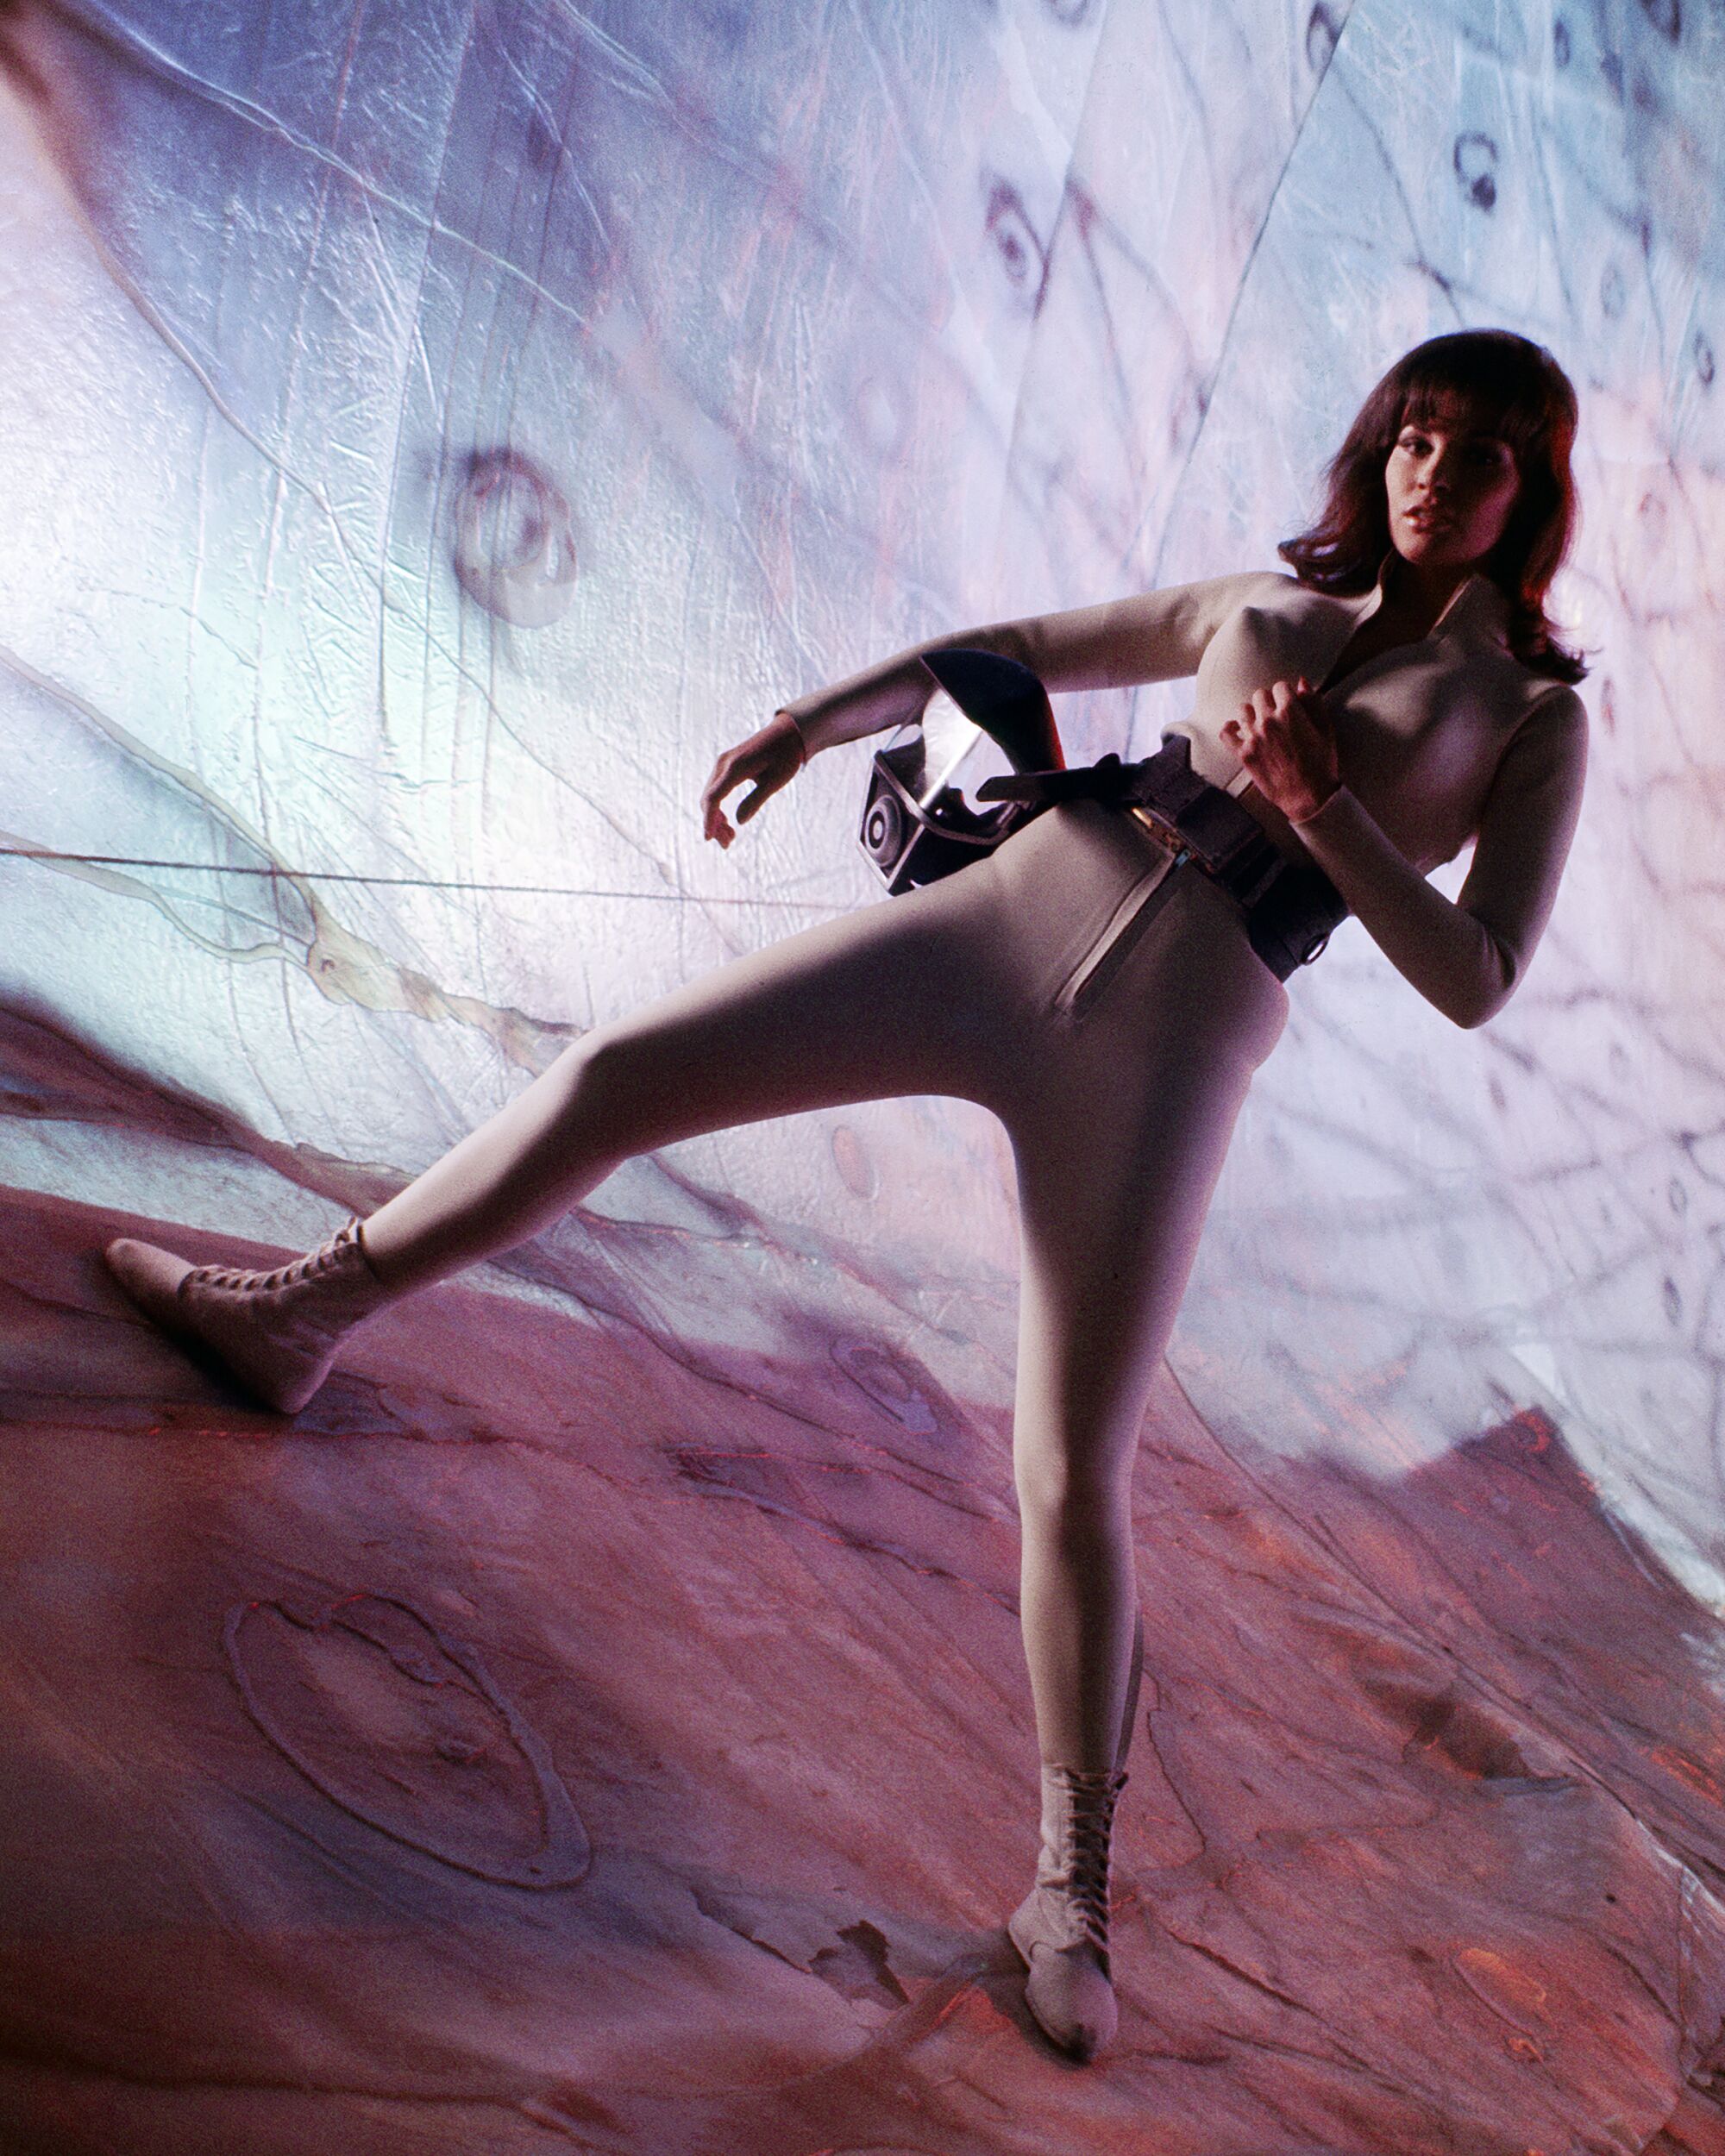  Raquel Welch strikes a pose on the set of 'Fantastic Voyage.'